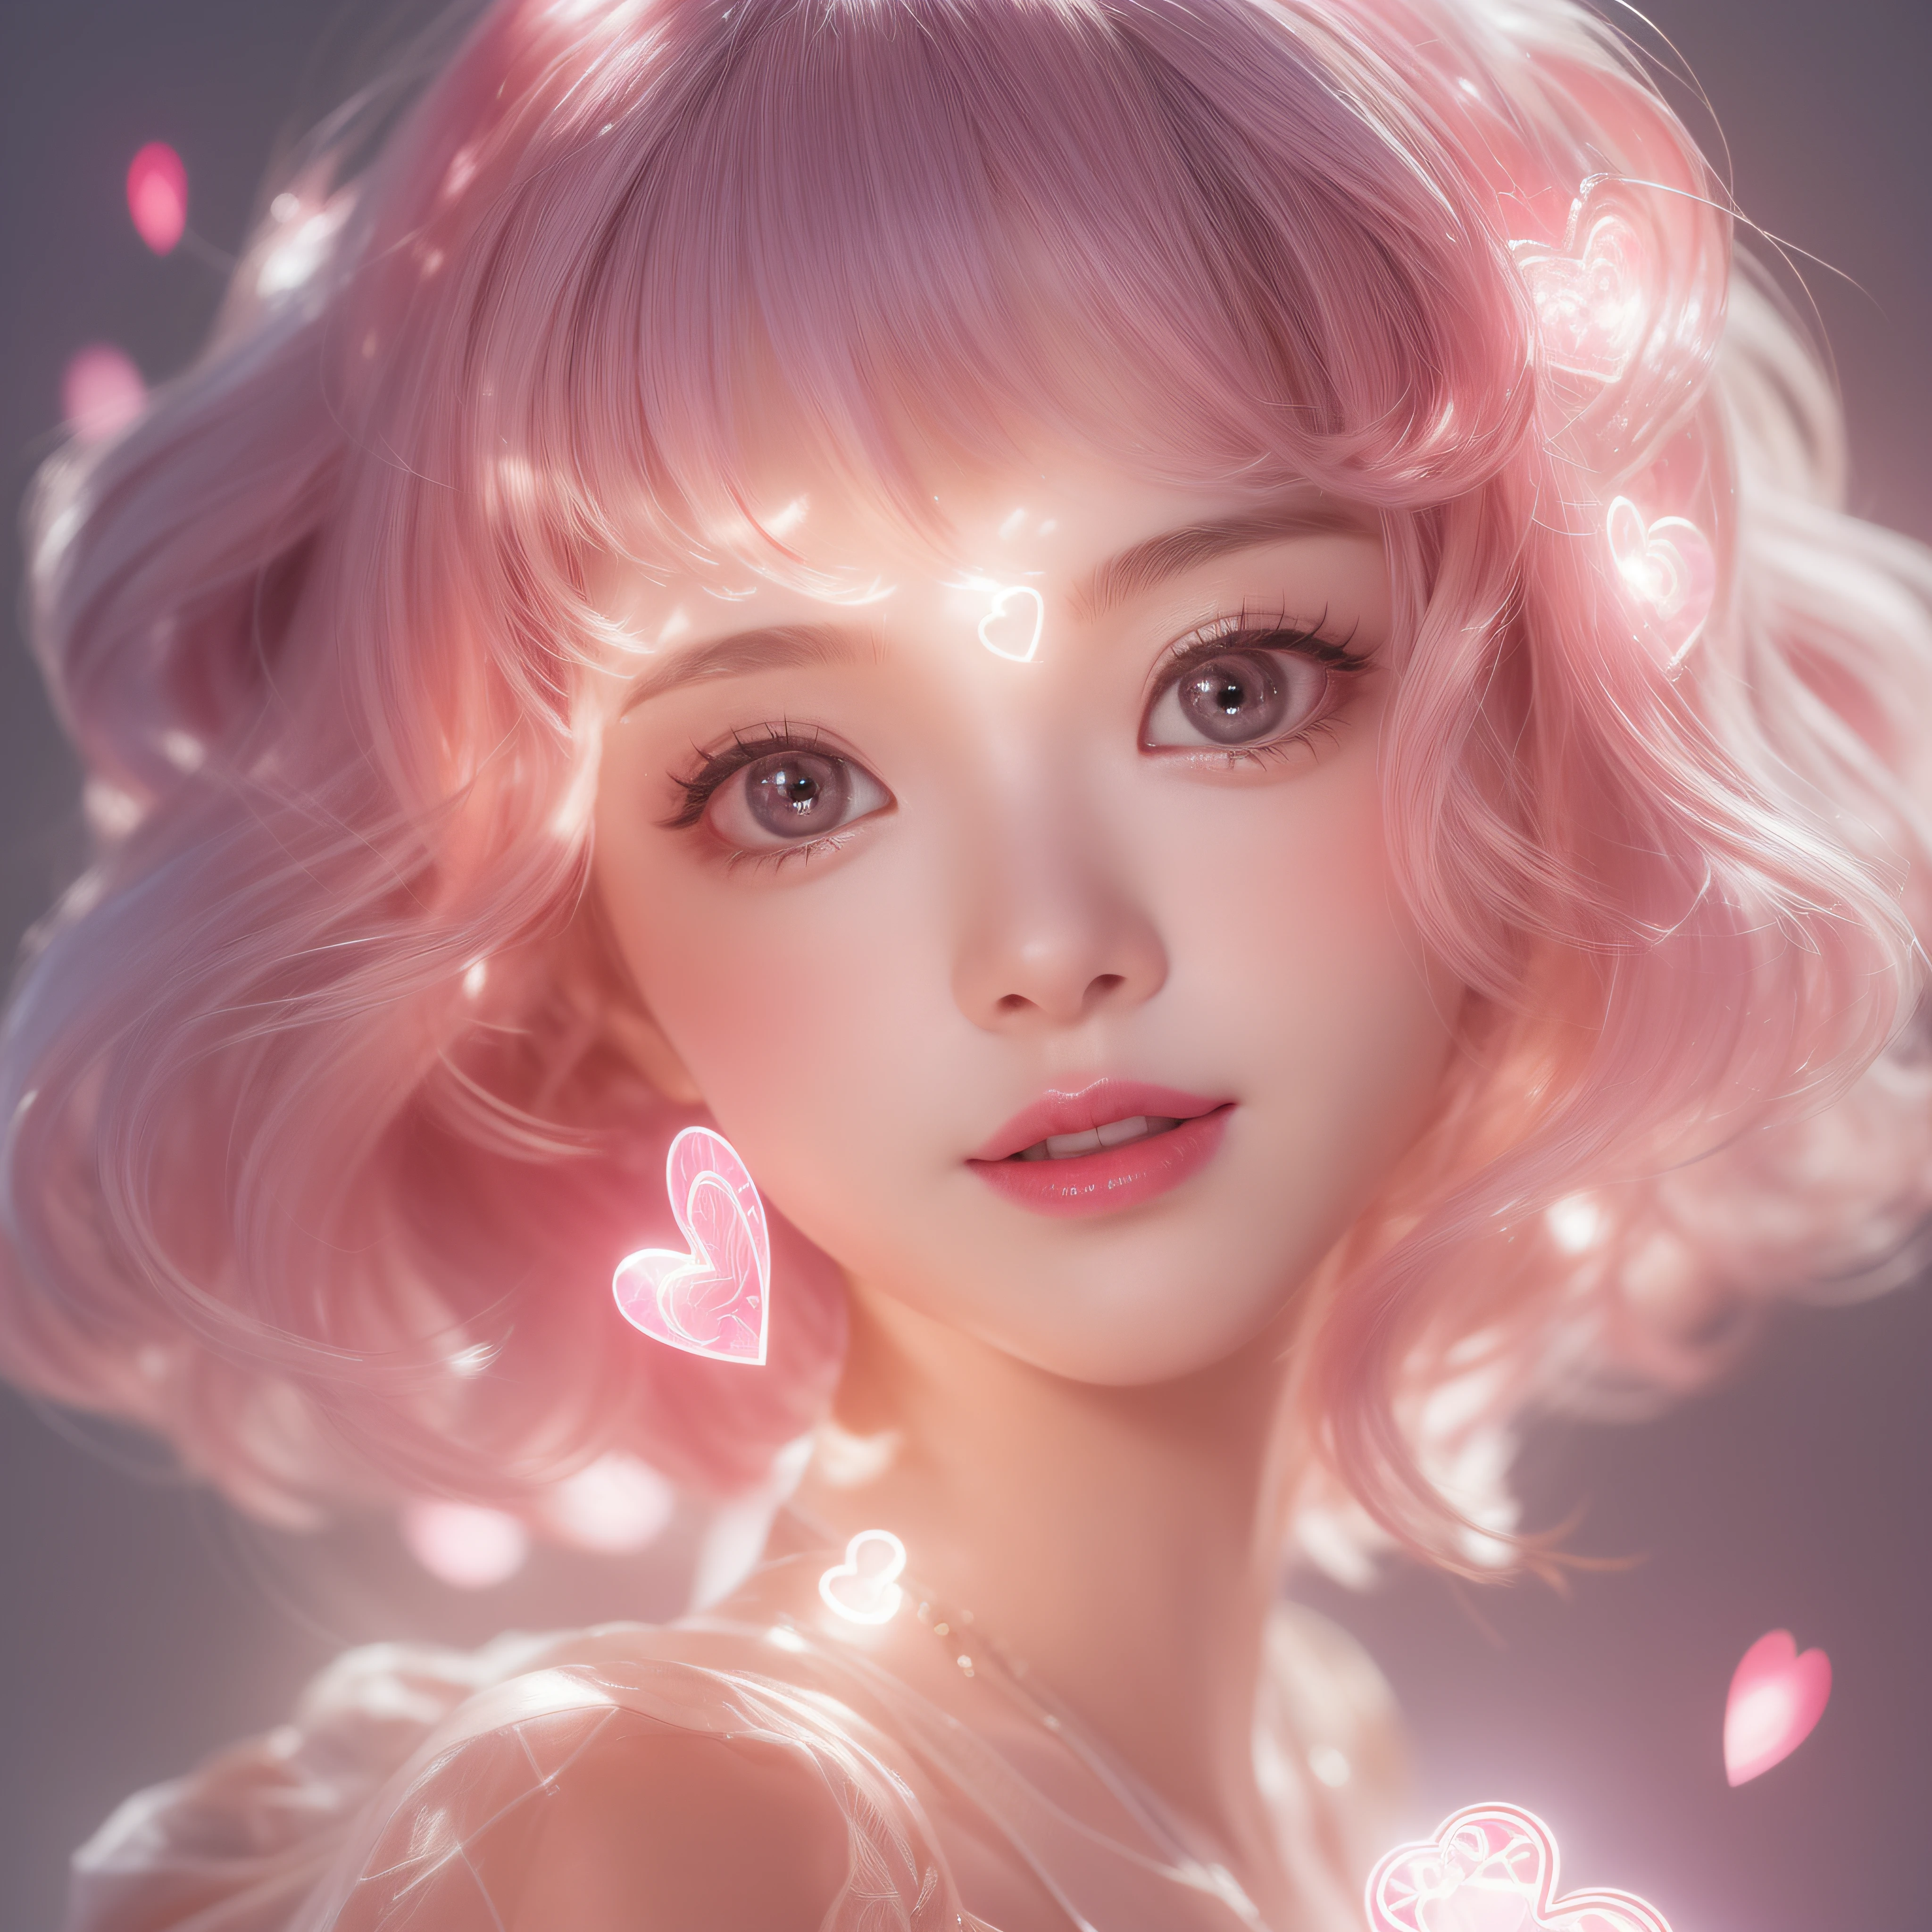 close-up of the smile face、close-up of the smile face、Designer、(realisitic、hight resolution)、(1 girl in)、Do-Up Eye、Korean Girl、(Best Quality), (masutepiece), (1girl in), Solo, a beauty girl, Perfect face, dreamlikeart、Highly detailed airbrush art((Surreal))、Volumetric lighting、(top-quality)、The ultra-detailliert、Highly detailed colorful details、(Bright lighting)、dynamic compositions、Ray traching、The mirror reflects light、Shallow depth of field、ultra-detailliert、mixing  exposure、nffsw、Her eyes are pink and glow heart-shaped、The eyes are pink-heart-shaped。Pink glowing three-dimensional heart on background、Pink glowing three-dimensional heart on background、Pink glowing three-dimensional heart on background、